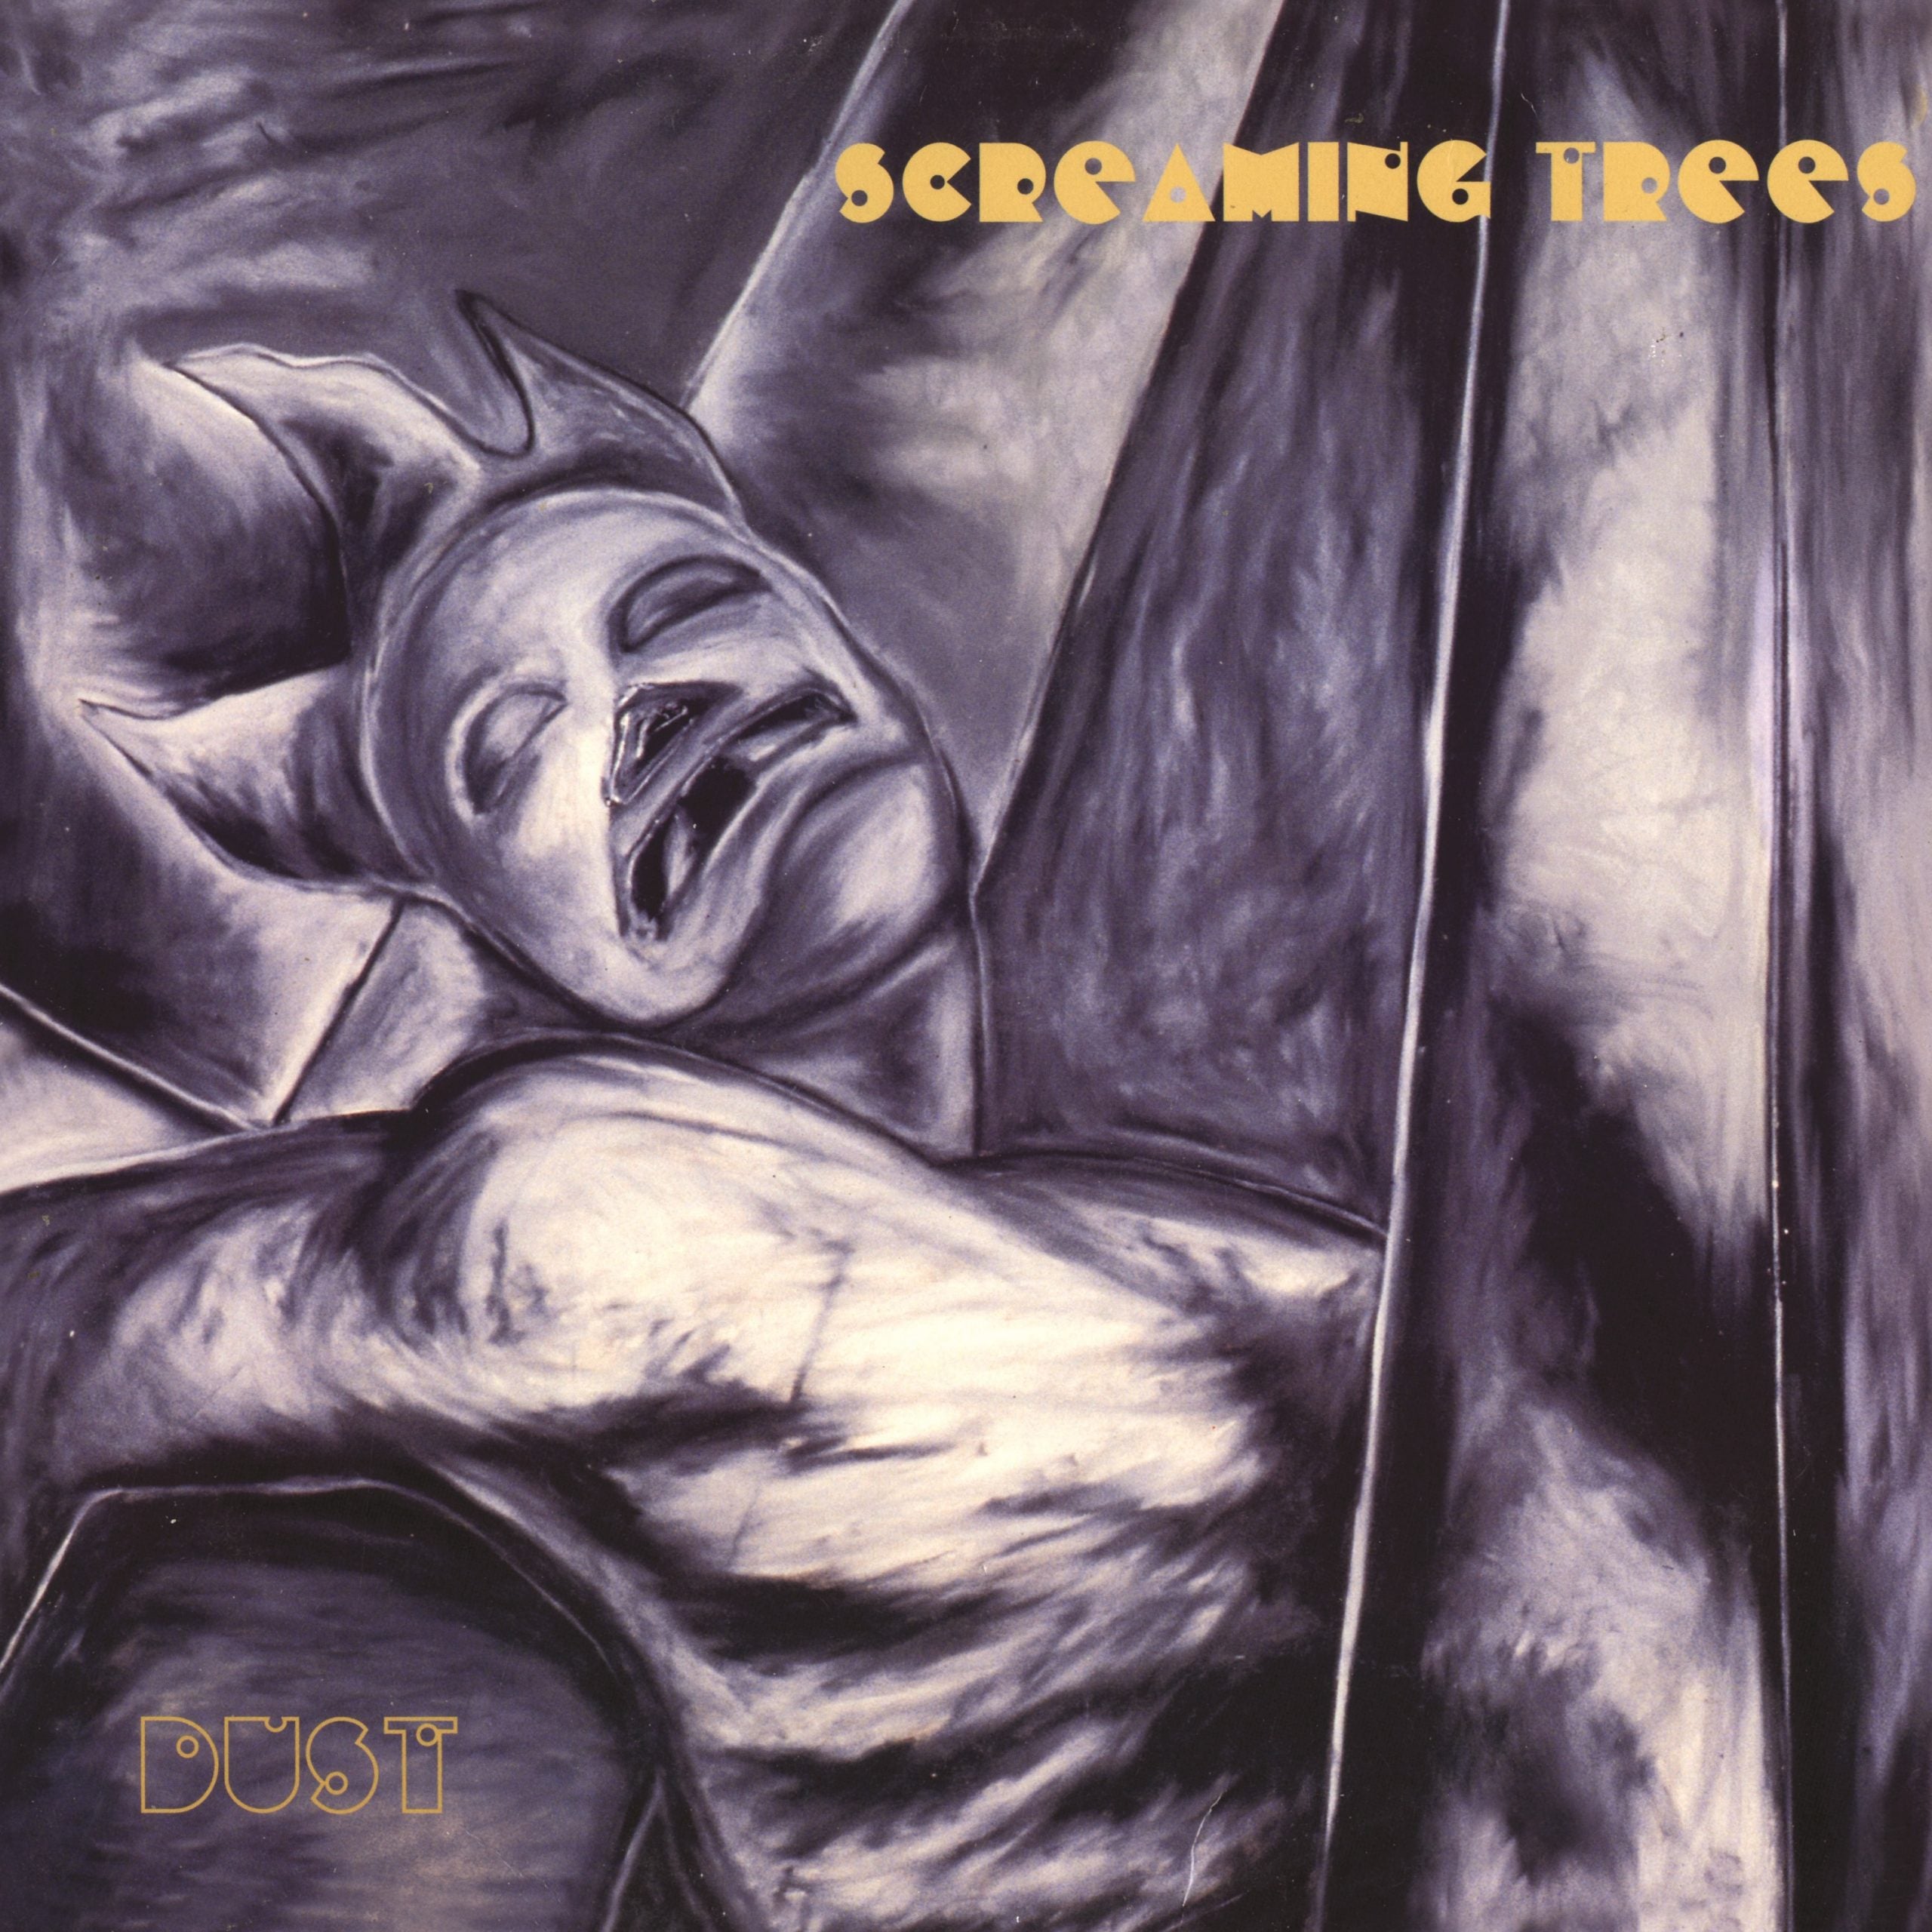 Screaming Trees - Dust (2 CD - Expanded Edition - Imported)